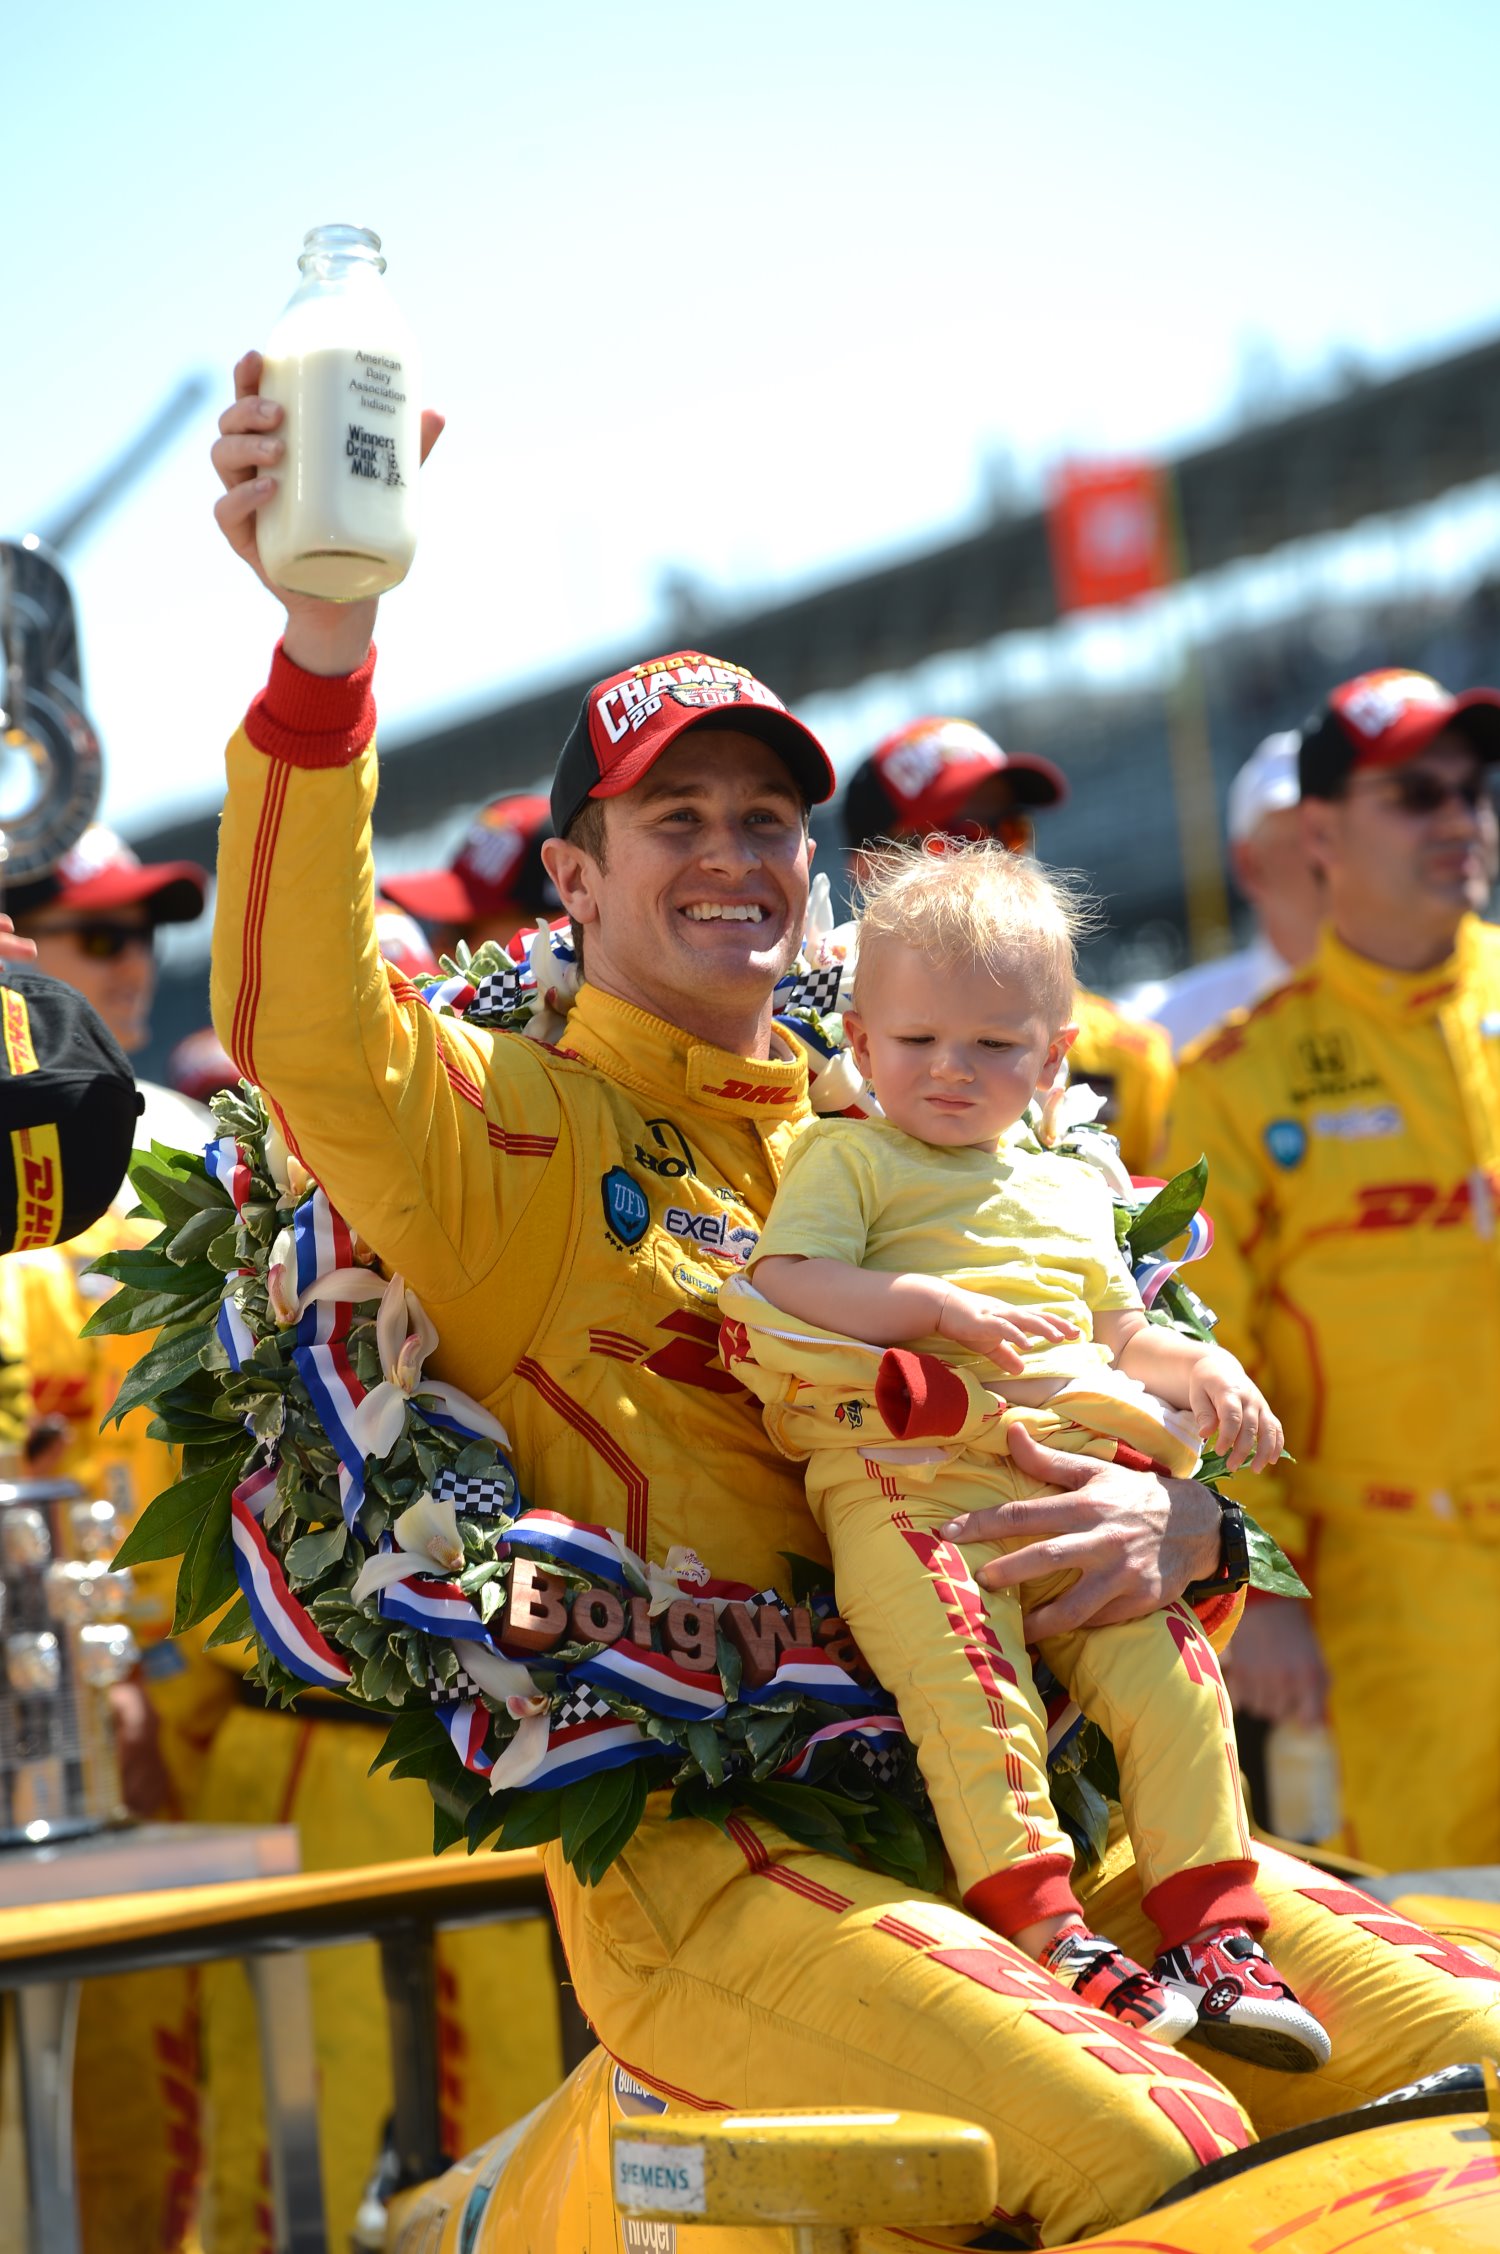 Son Ryden is was in victory lane with dad at Indy